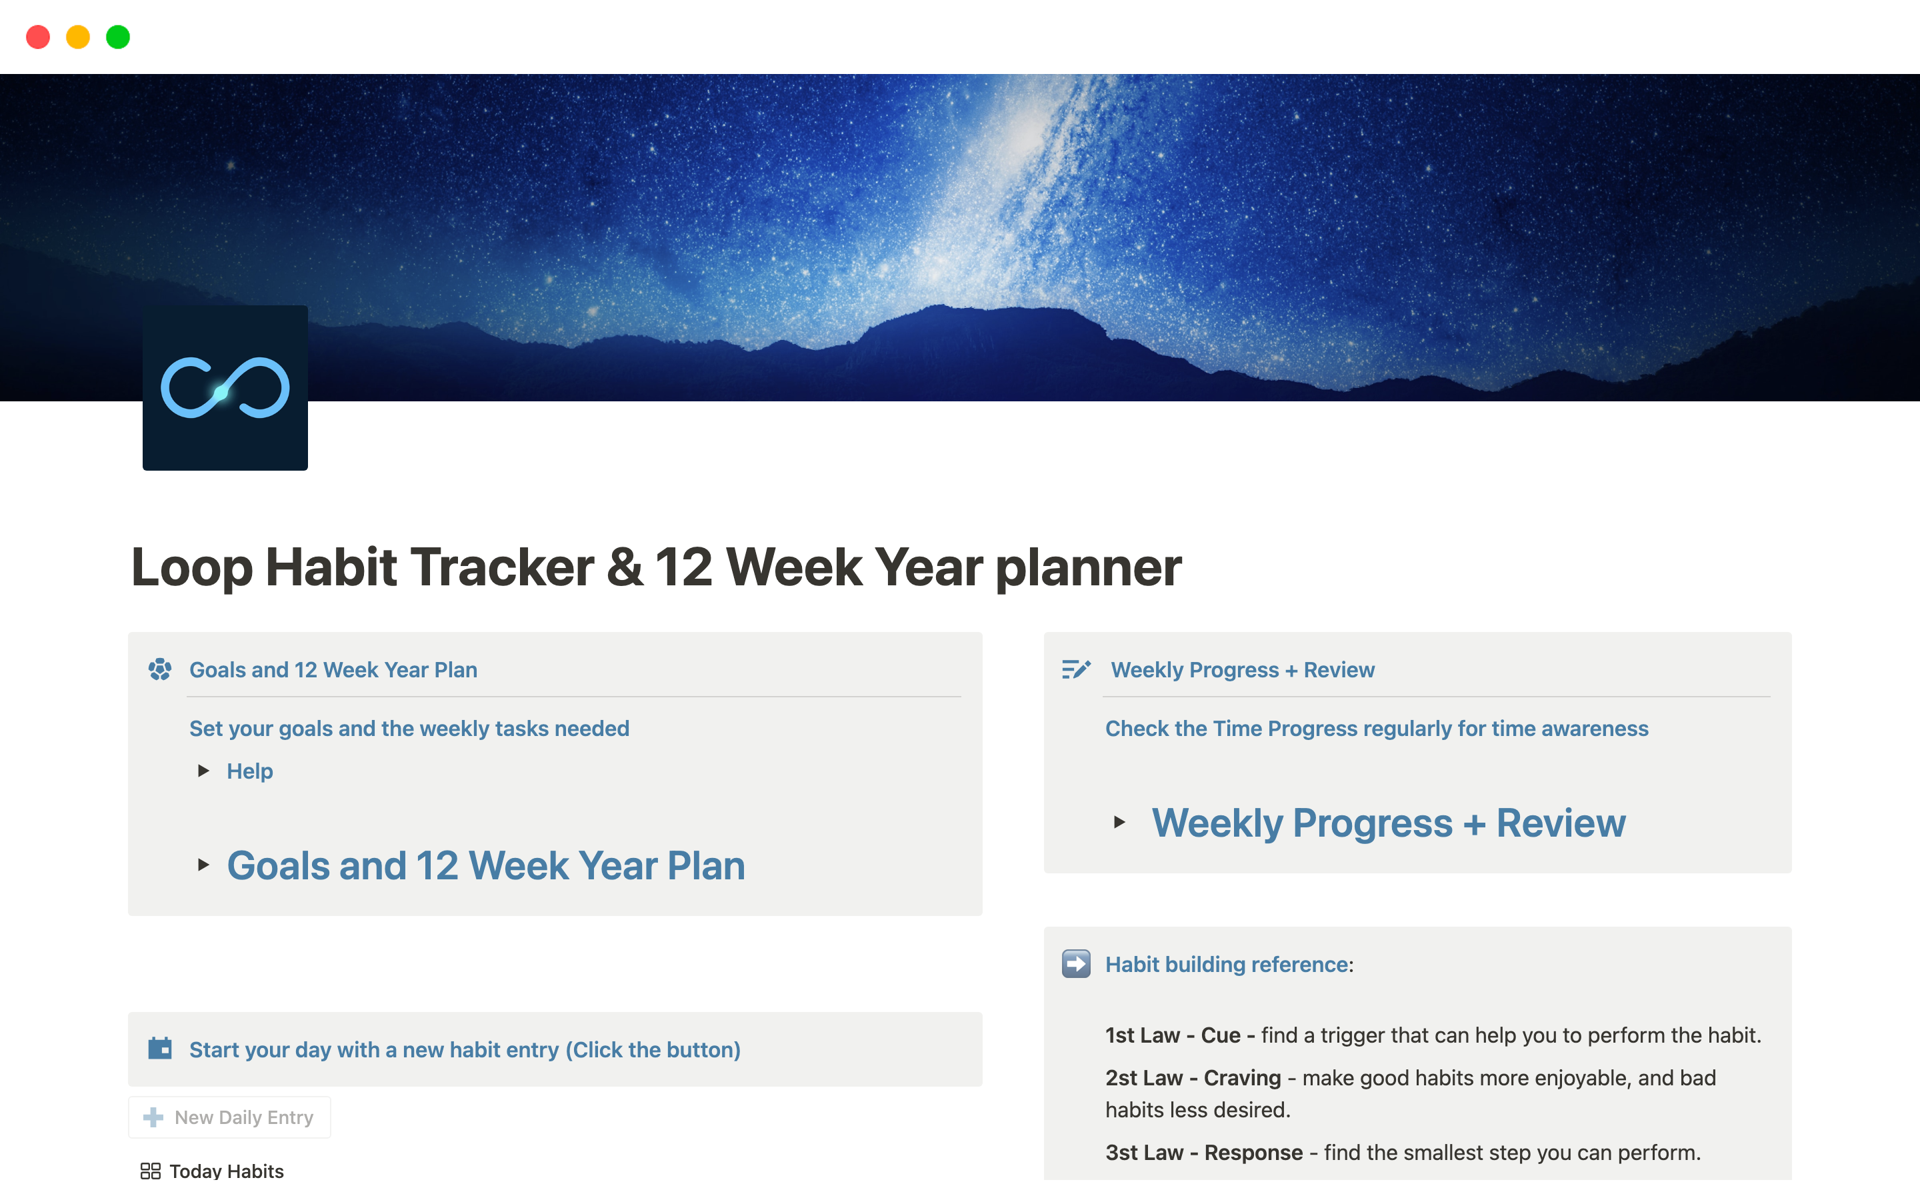 Elevate your goal-setting and habit-building journey with our revolutionary Loop Habit Tracker & 12 Week Year Planner. 